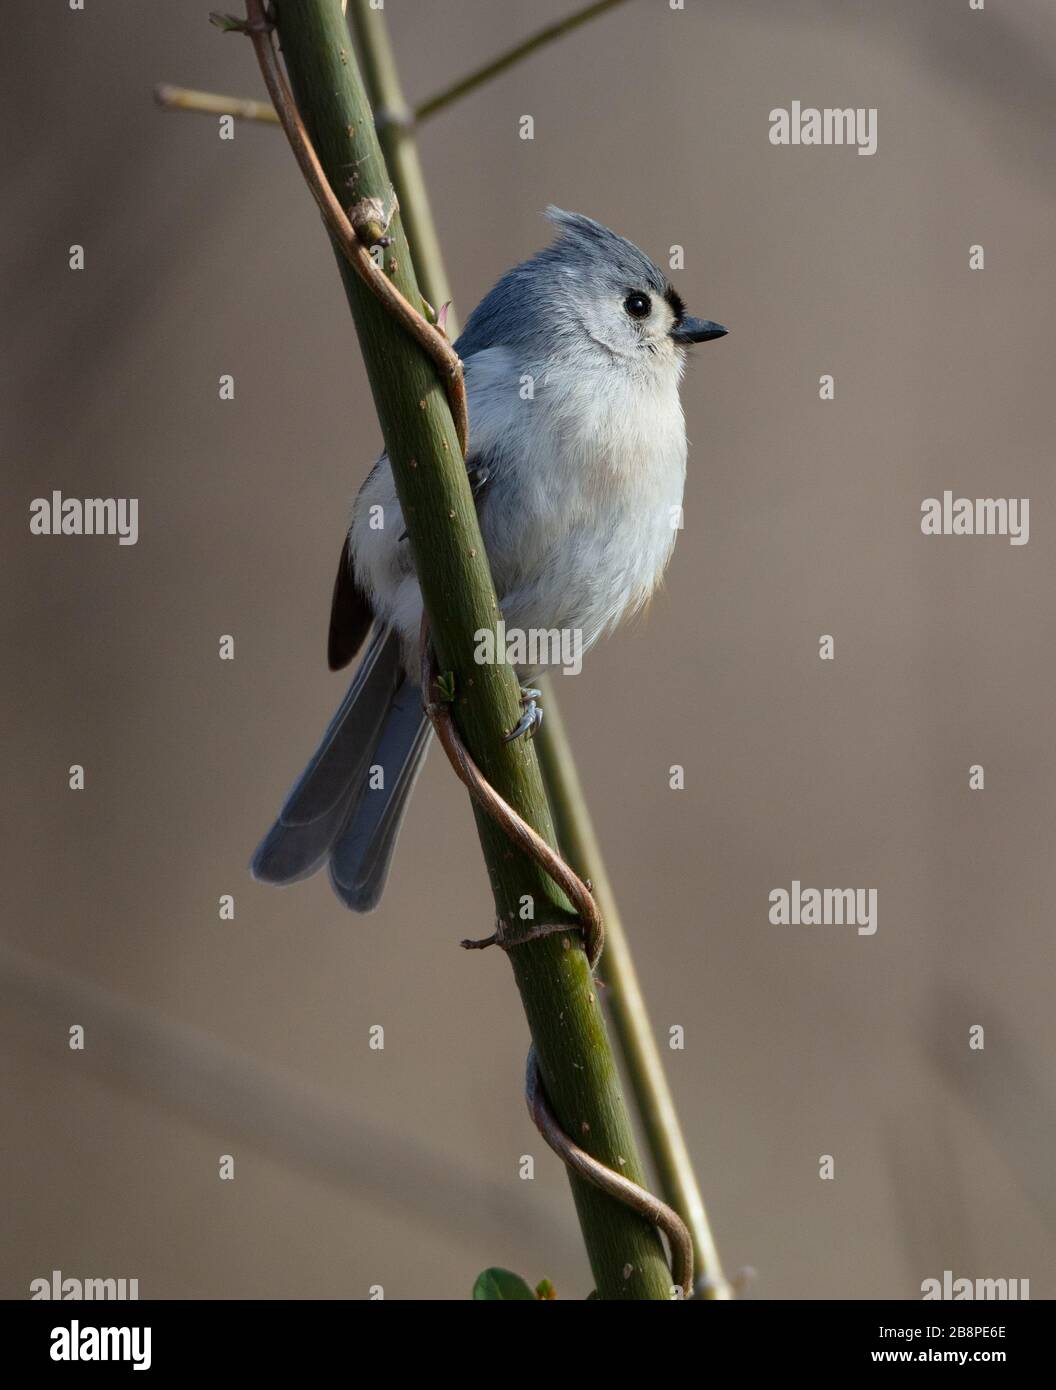 A handsome tufted titmouse (Baeolophus bicolor) perches on a green stem on a bright day Stock Photo